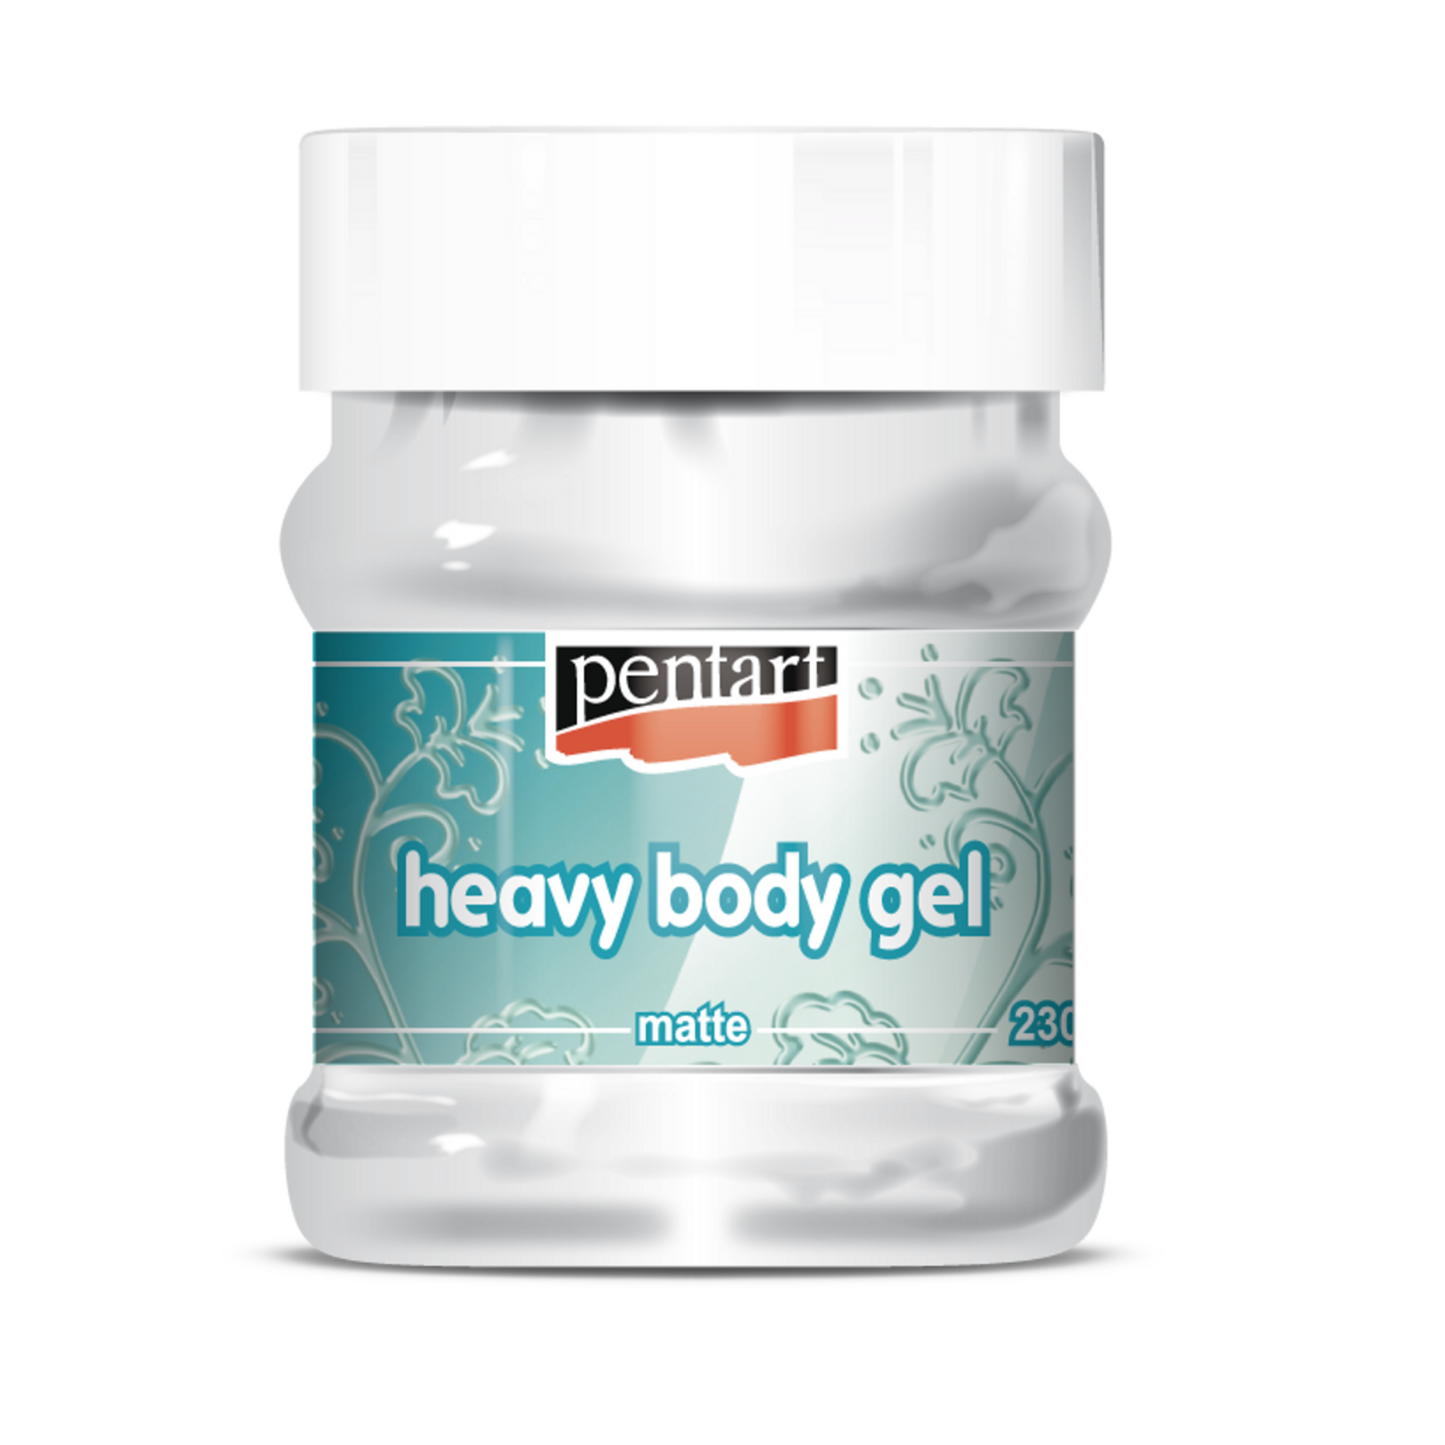 Heaby Body Gel Matte by Pentart available at Milton's Daughter.